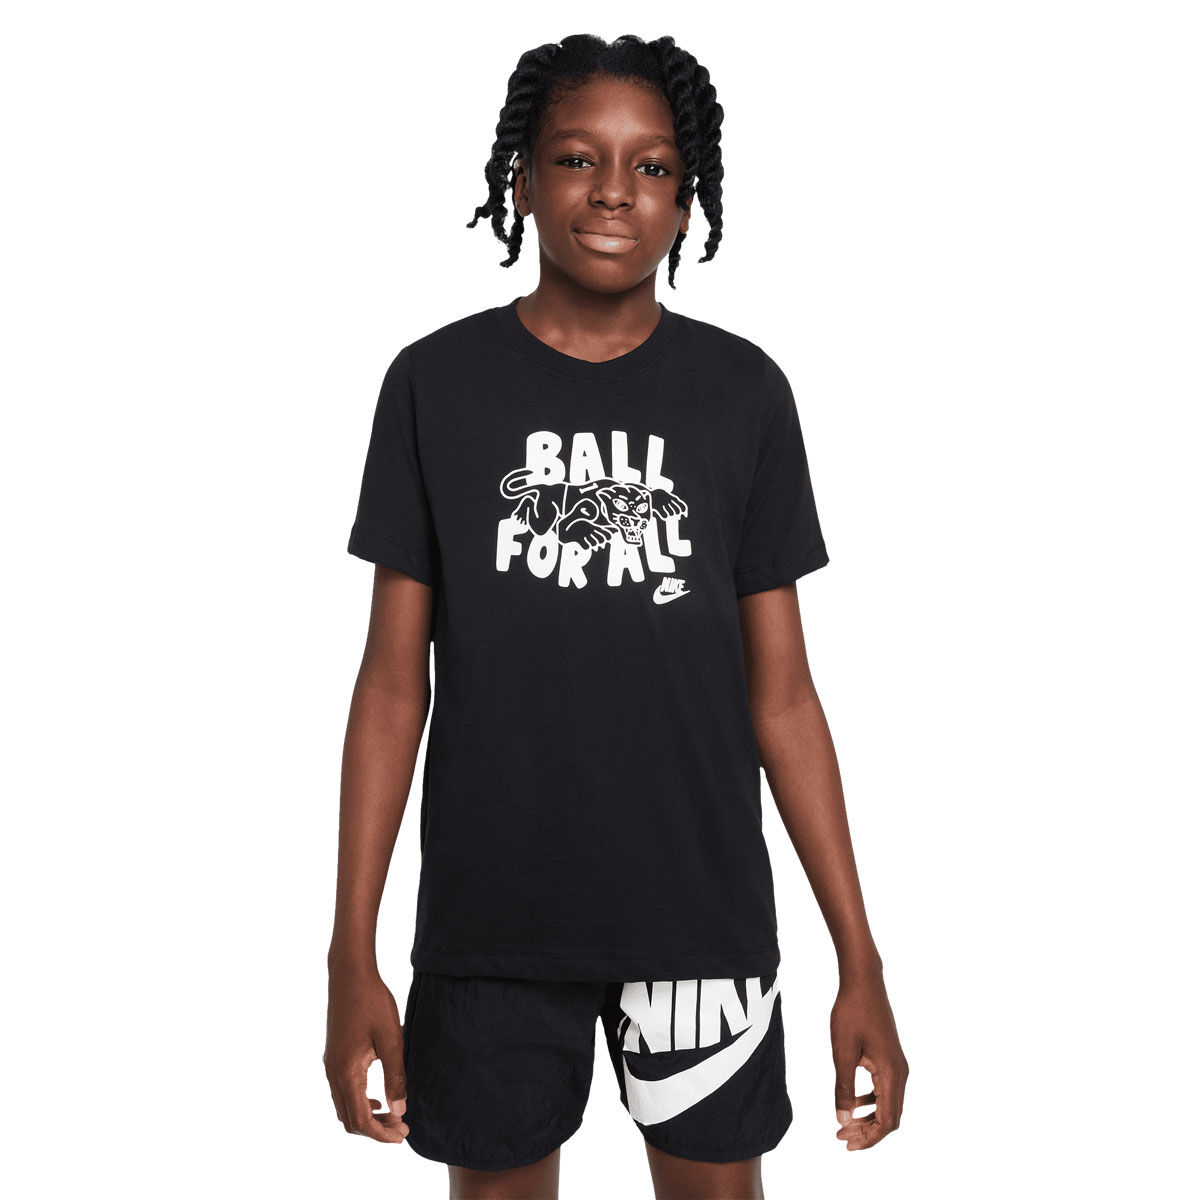 ONLY BOYS Basketball Short Set 2 Piece Athletic Tee Shirt and Short Sets 